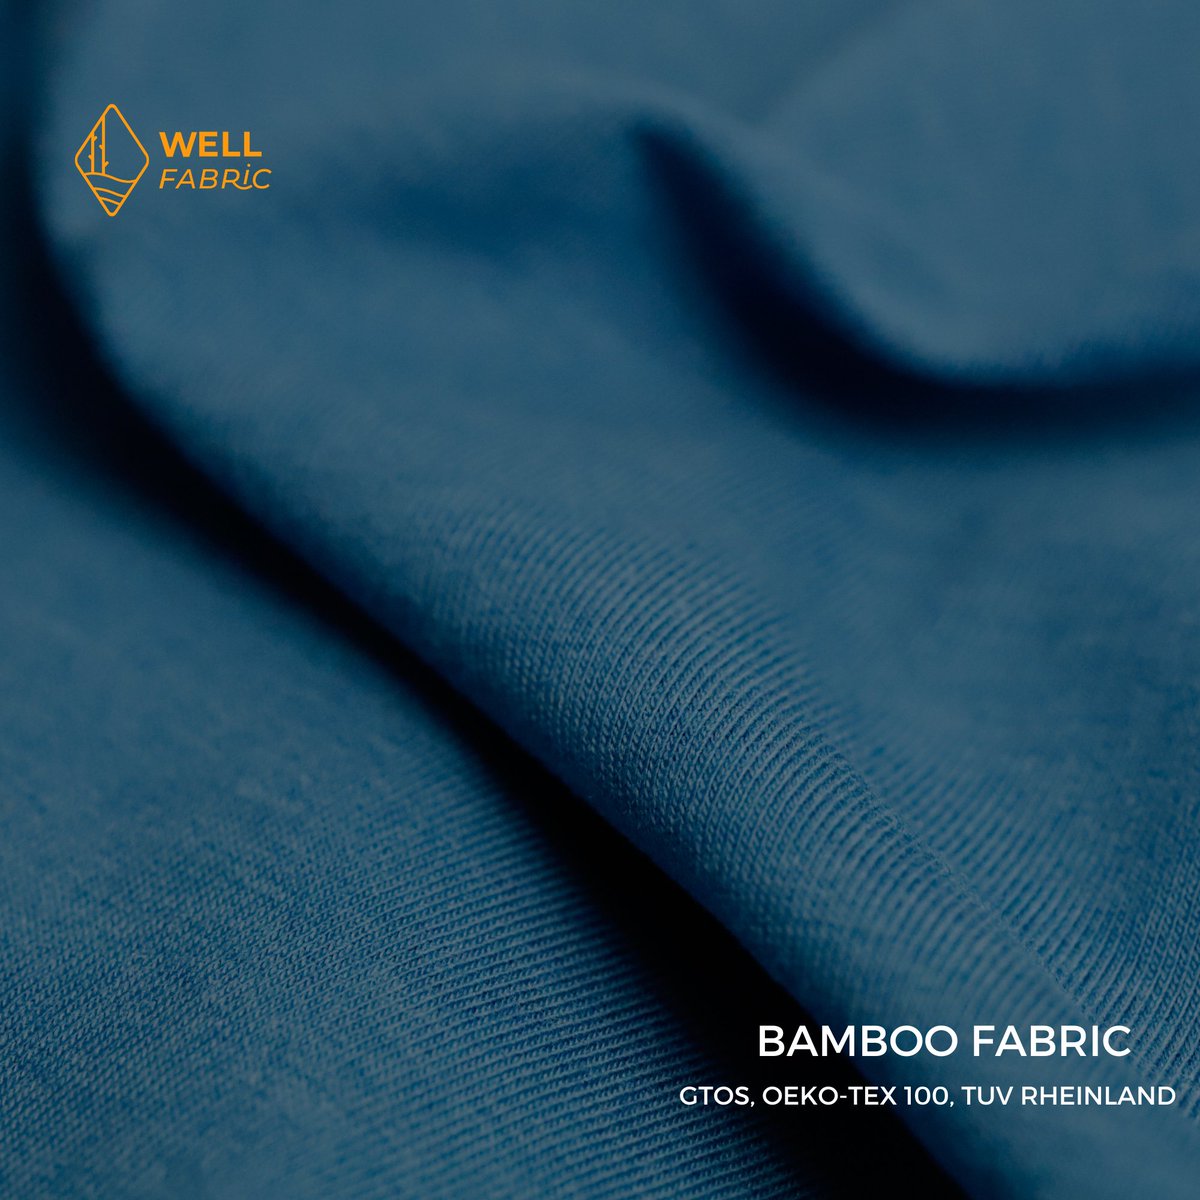 Explore the Elegance of Bamboo Fabric: Softness and Eco-Friendly
~~~~
Spec: 95% Bamboo - 5% Spandex
Knitting: Single Jersey
~~~~~~ 
Our bamboo fiber products meet these standards:
📷 GOTS (Global Organic Textile Standard)
📷 OEKO-TEX 100
📷 TUV Rheinland
#BambooFabric #Single